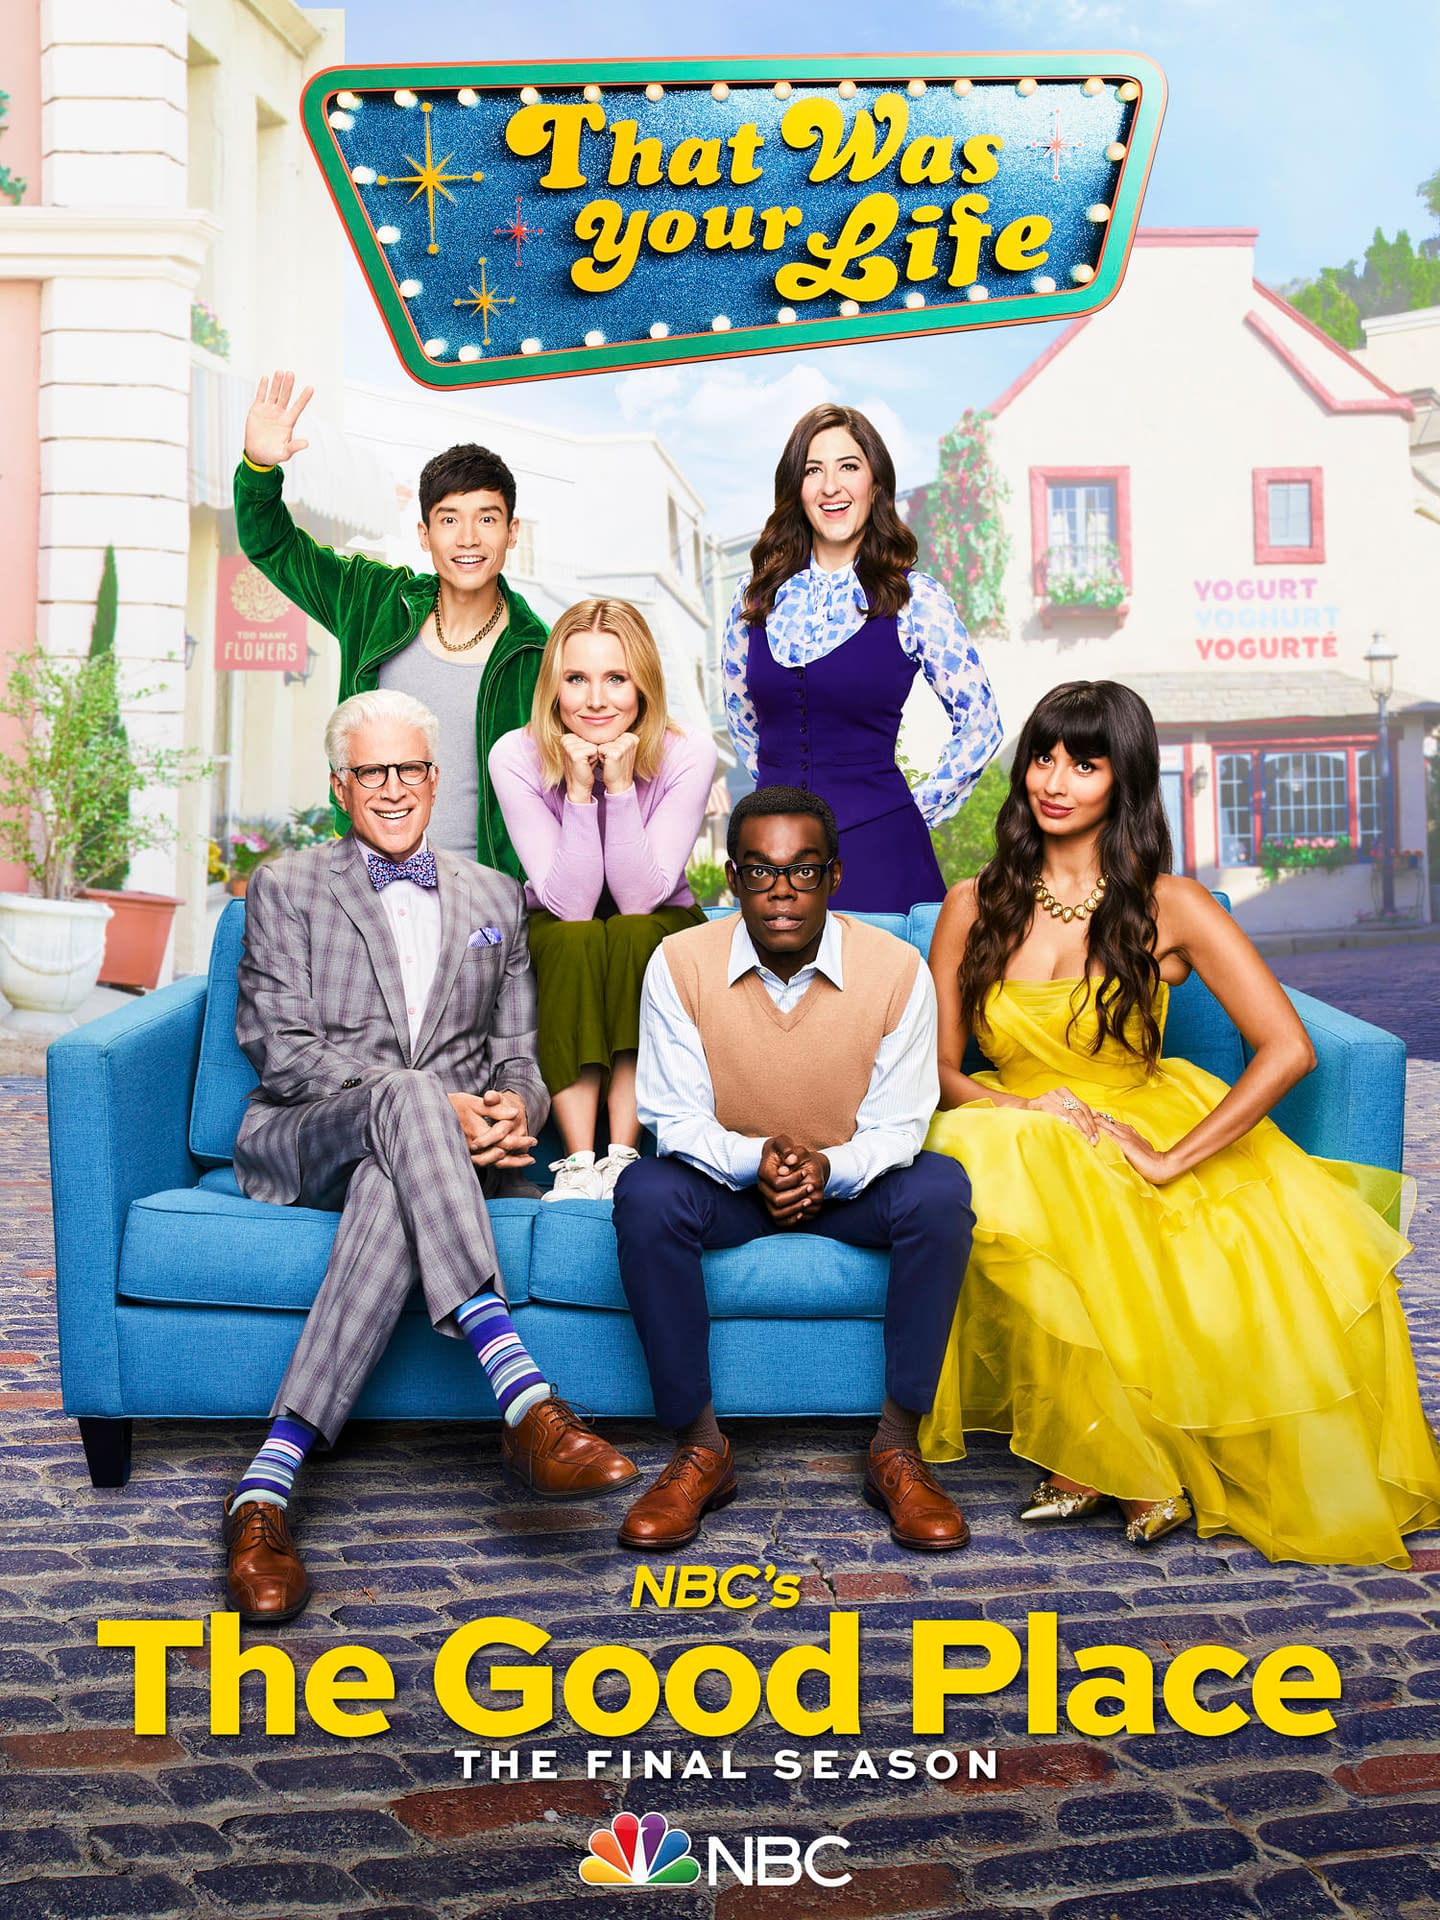 "The Good Place": The "Soul Squad" Offers Fans Season 4 First-Look [PREVIEW]